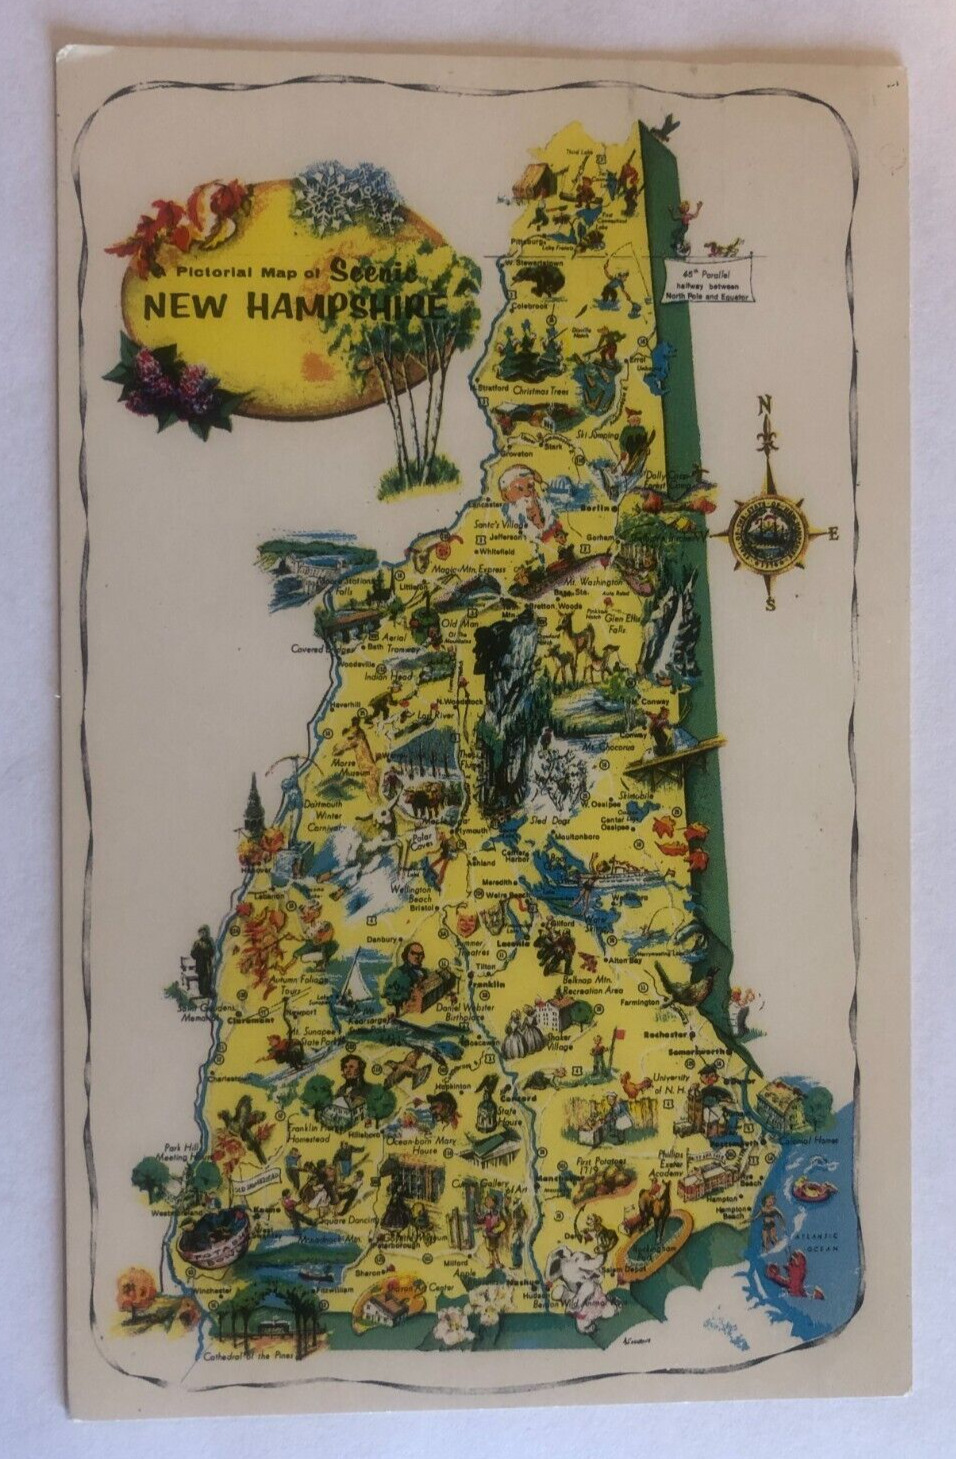 New Hampshire State Map, Landmarks & Attractions, Vintage Postcard, c1957